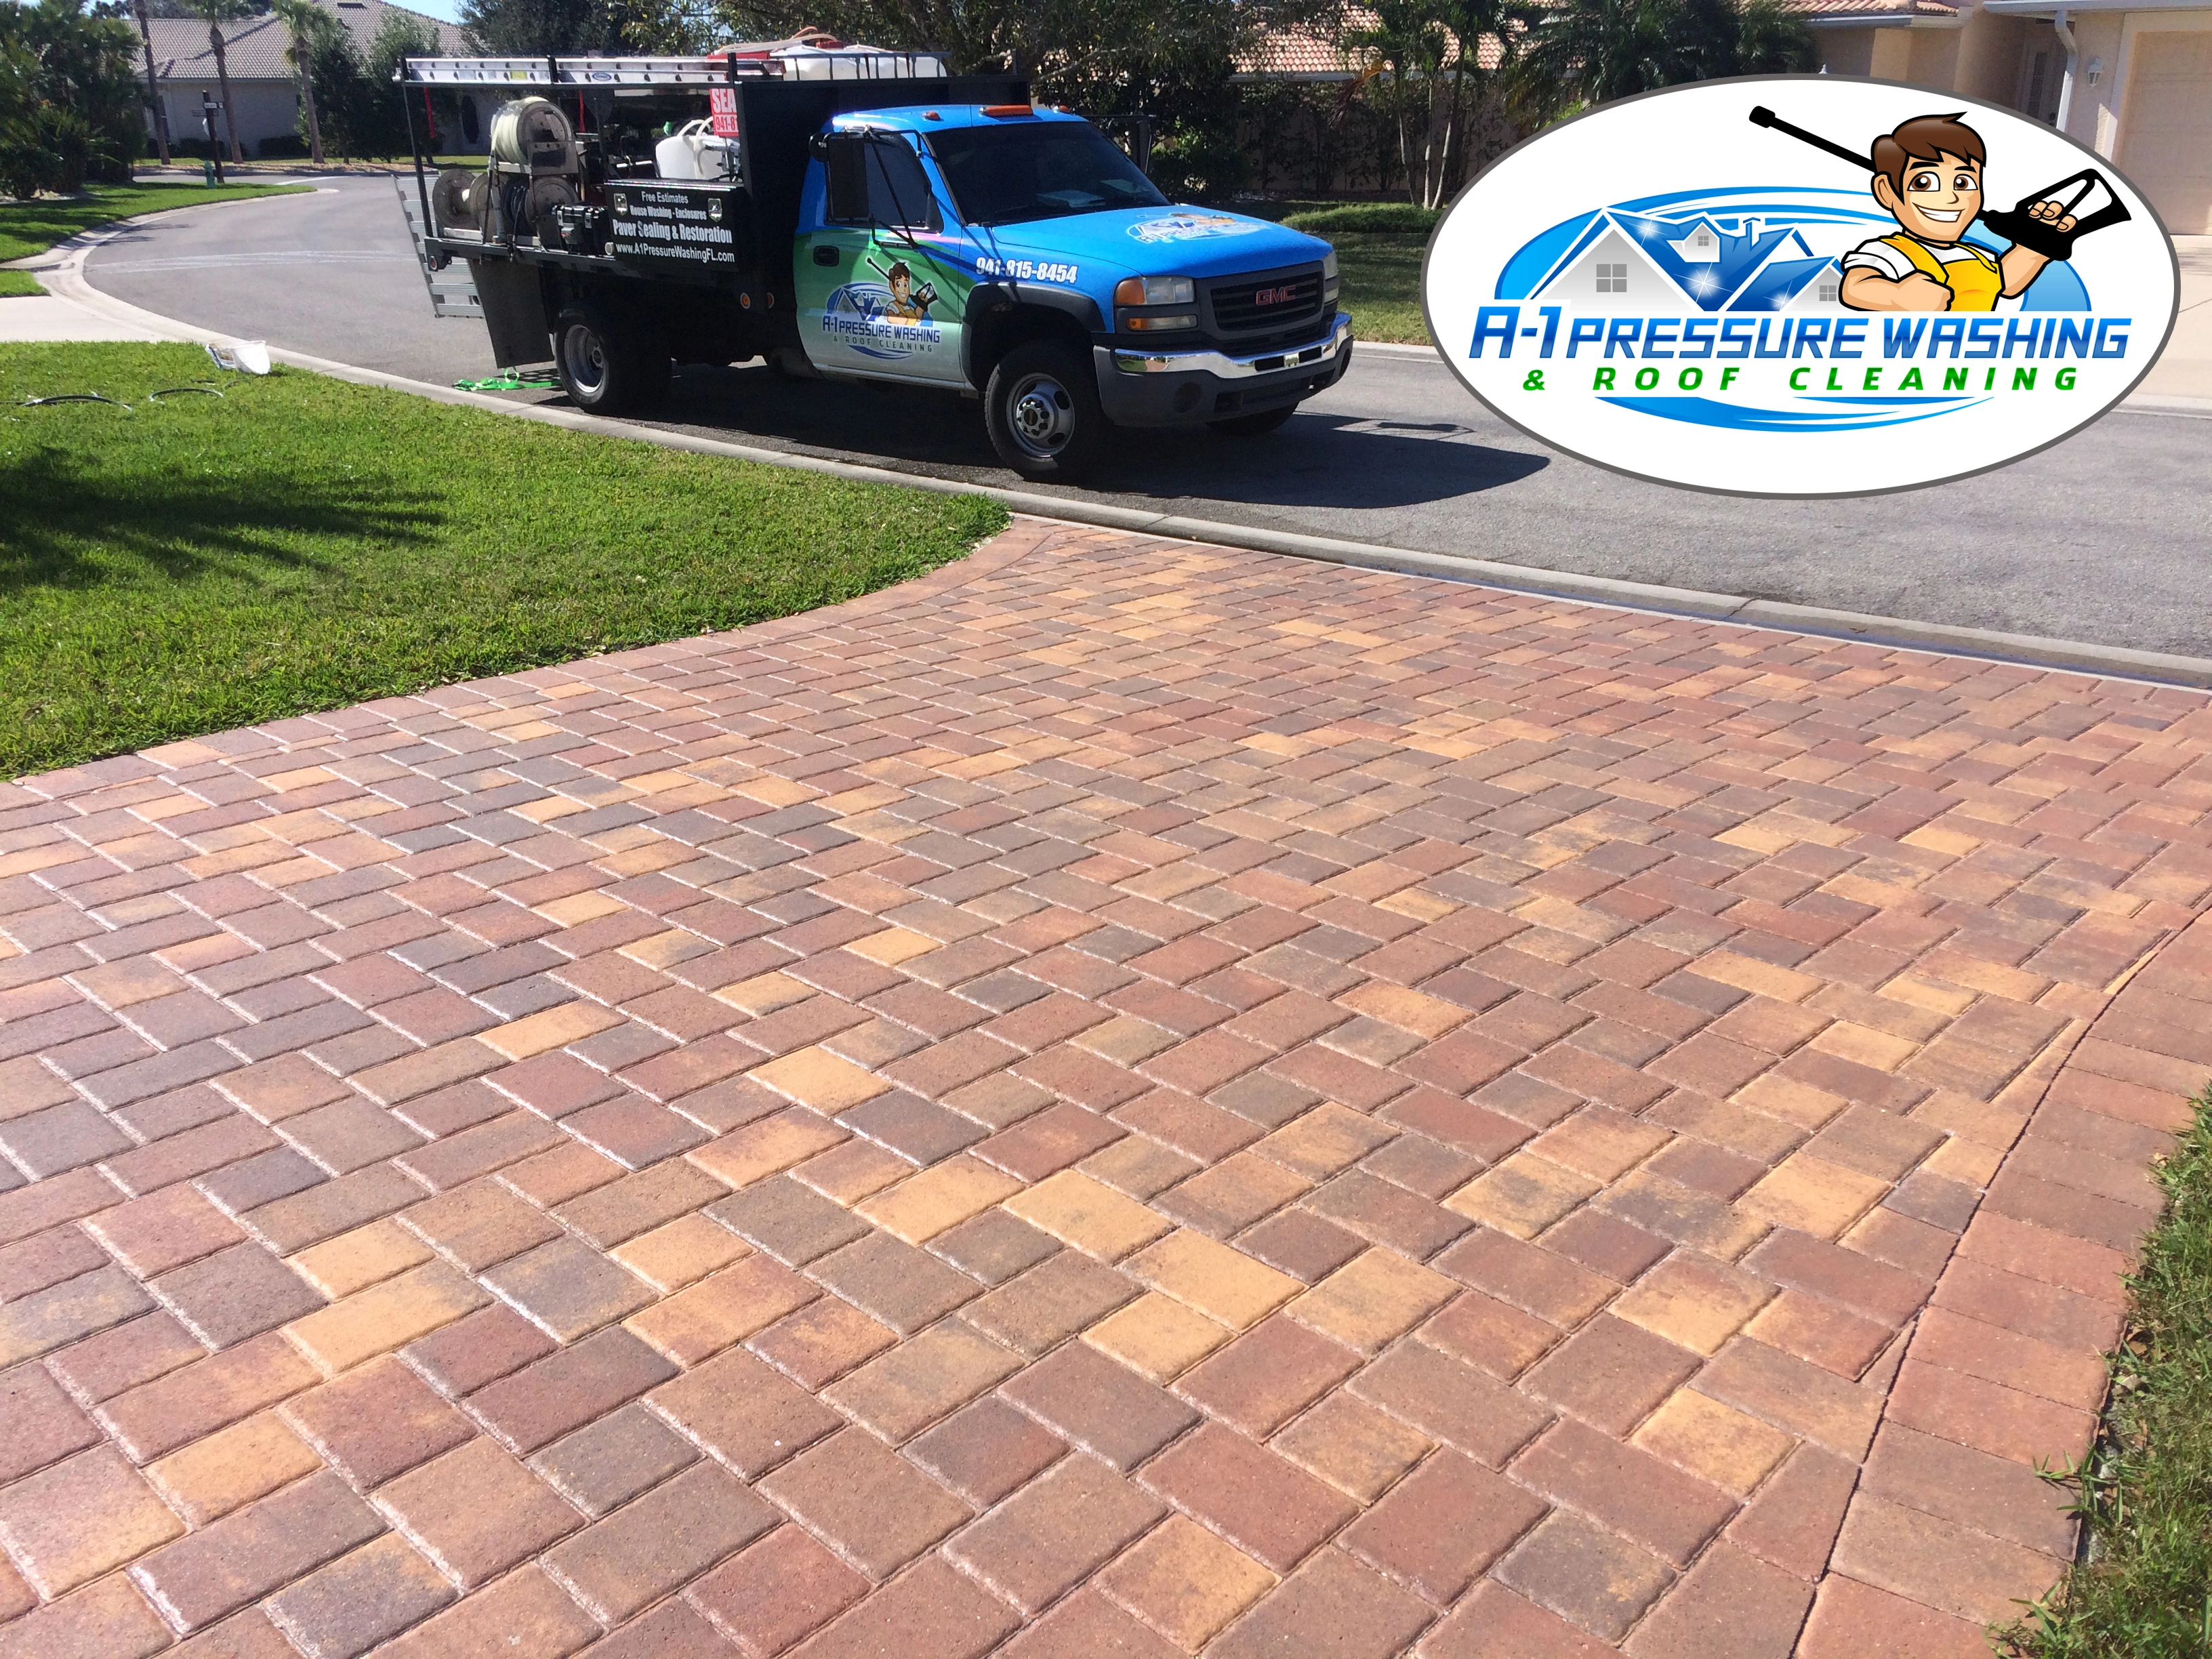 Brick Paver Sealing | A-1 Pressure Washing & Roof Cleaning | 941-815-8454 